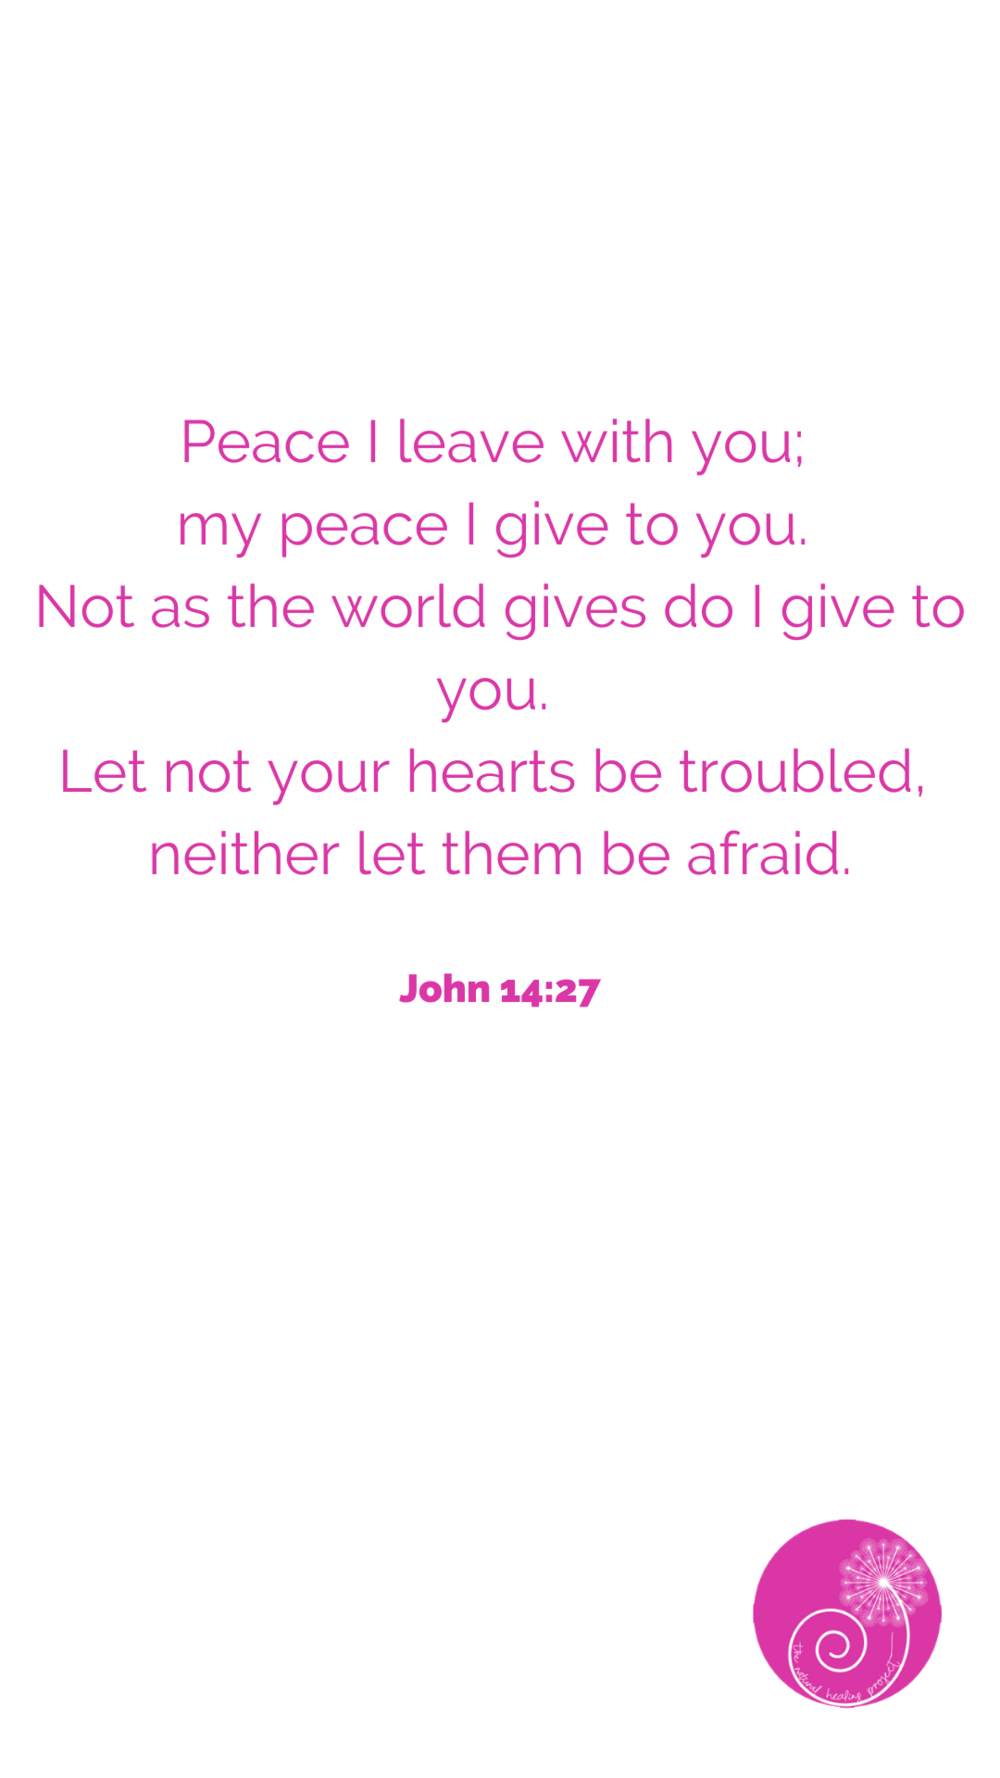 Peace I leave with you; my peace i give to you. Not as the world gives do I give to you. Let not your hearts be troubled, neither let them be afraid. (1).png